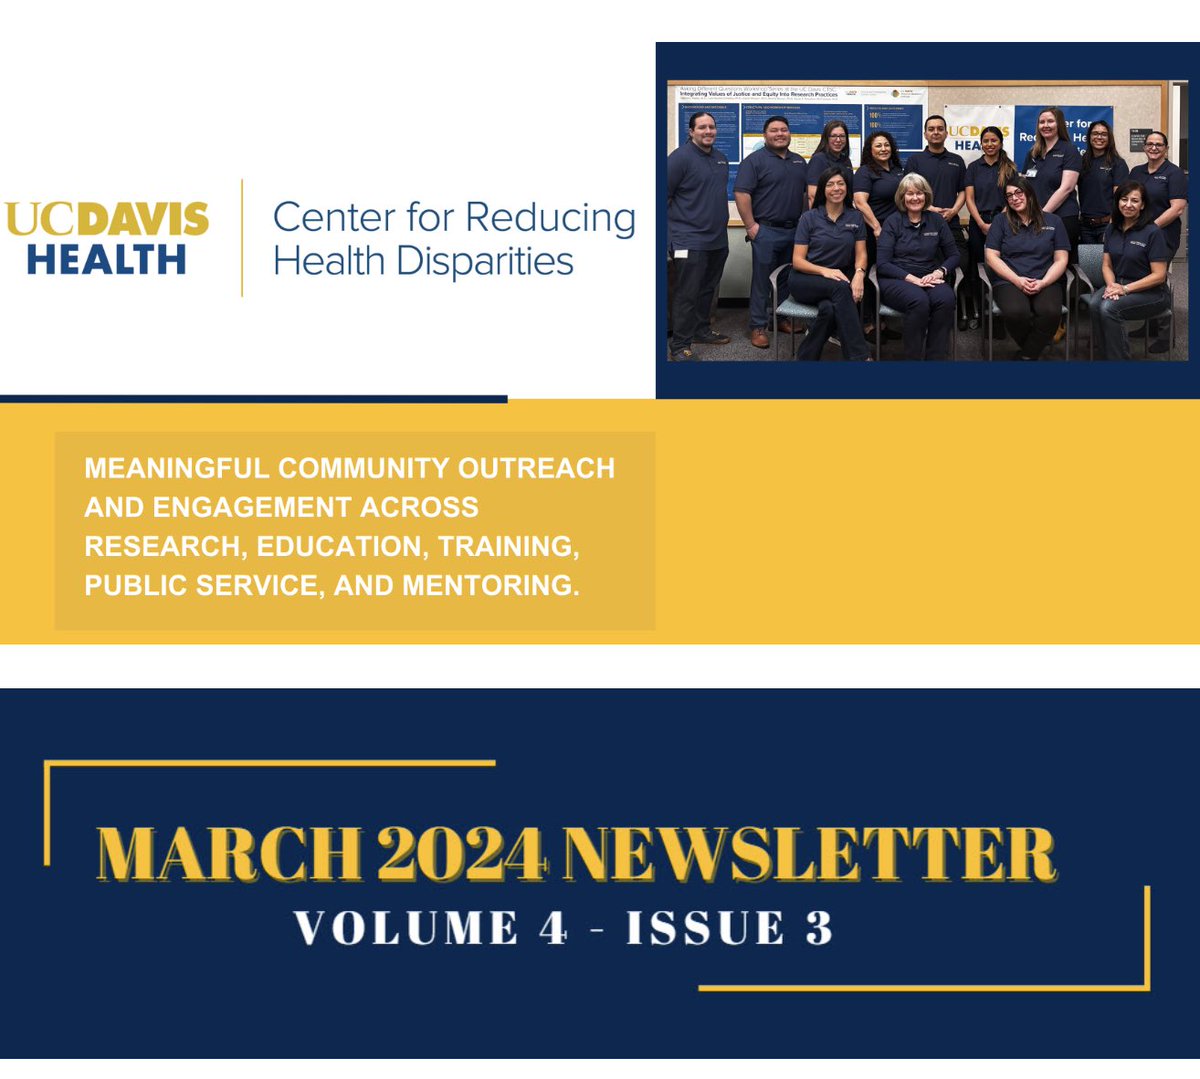 Check out our March Newsletter to learn more about our PANDEMIC Project, our director's Top 20 Latino Change Maker nomination, and upcoming partner events! Read it here: mailchi.mp/a461015944b5/c… Subscribe to be the first to know! #ucdavis #healthequity #ucdavishealth